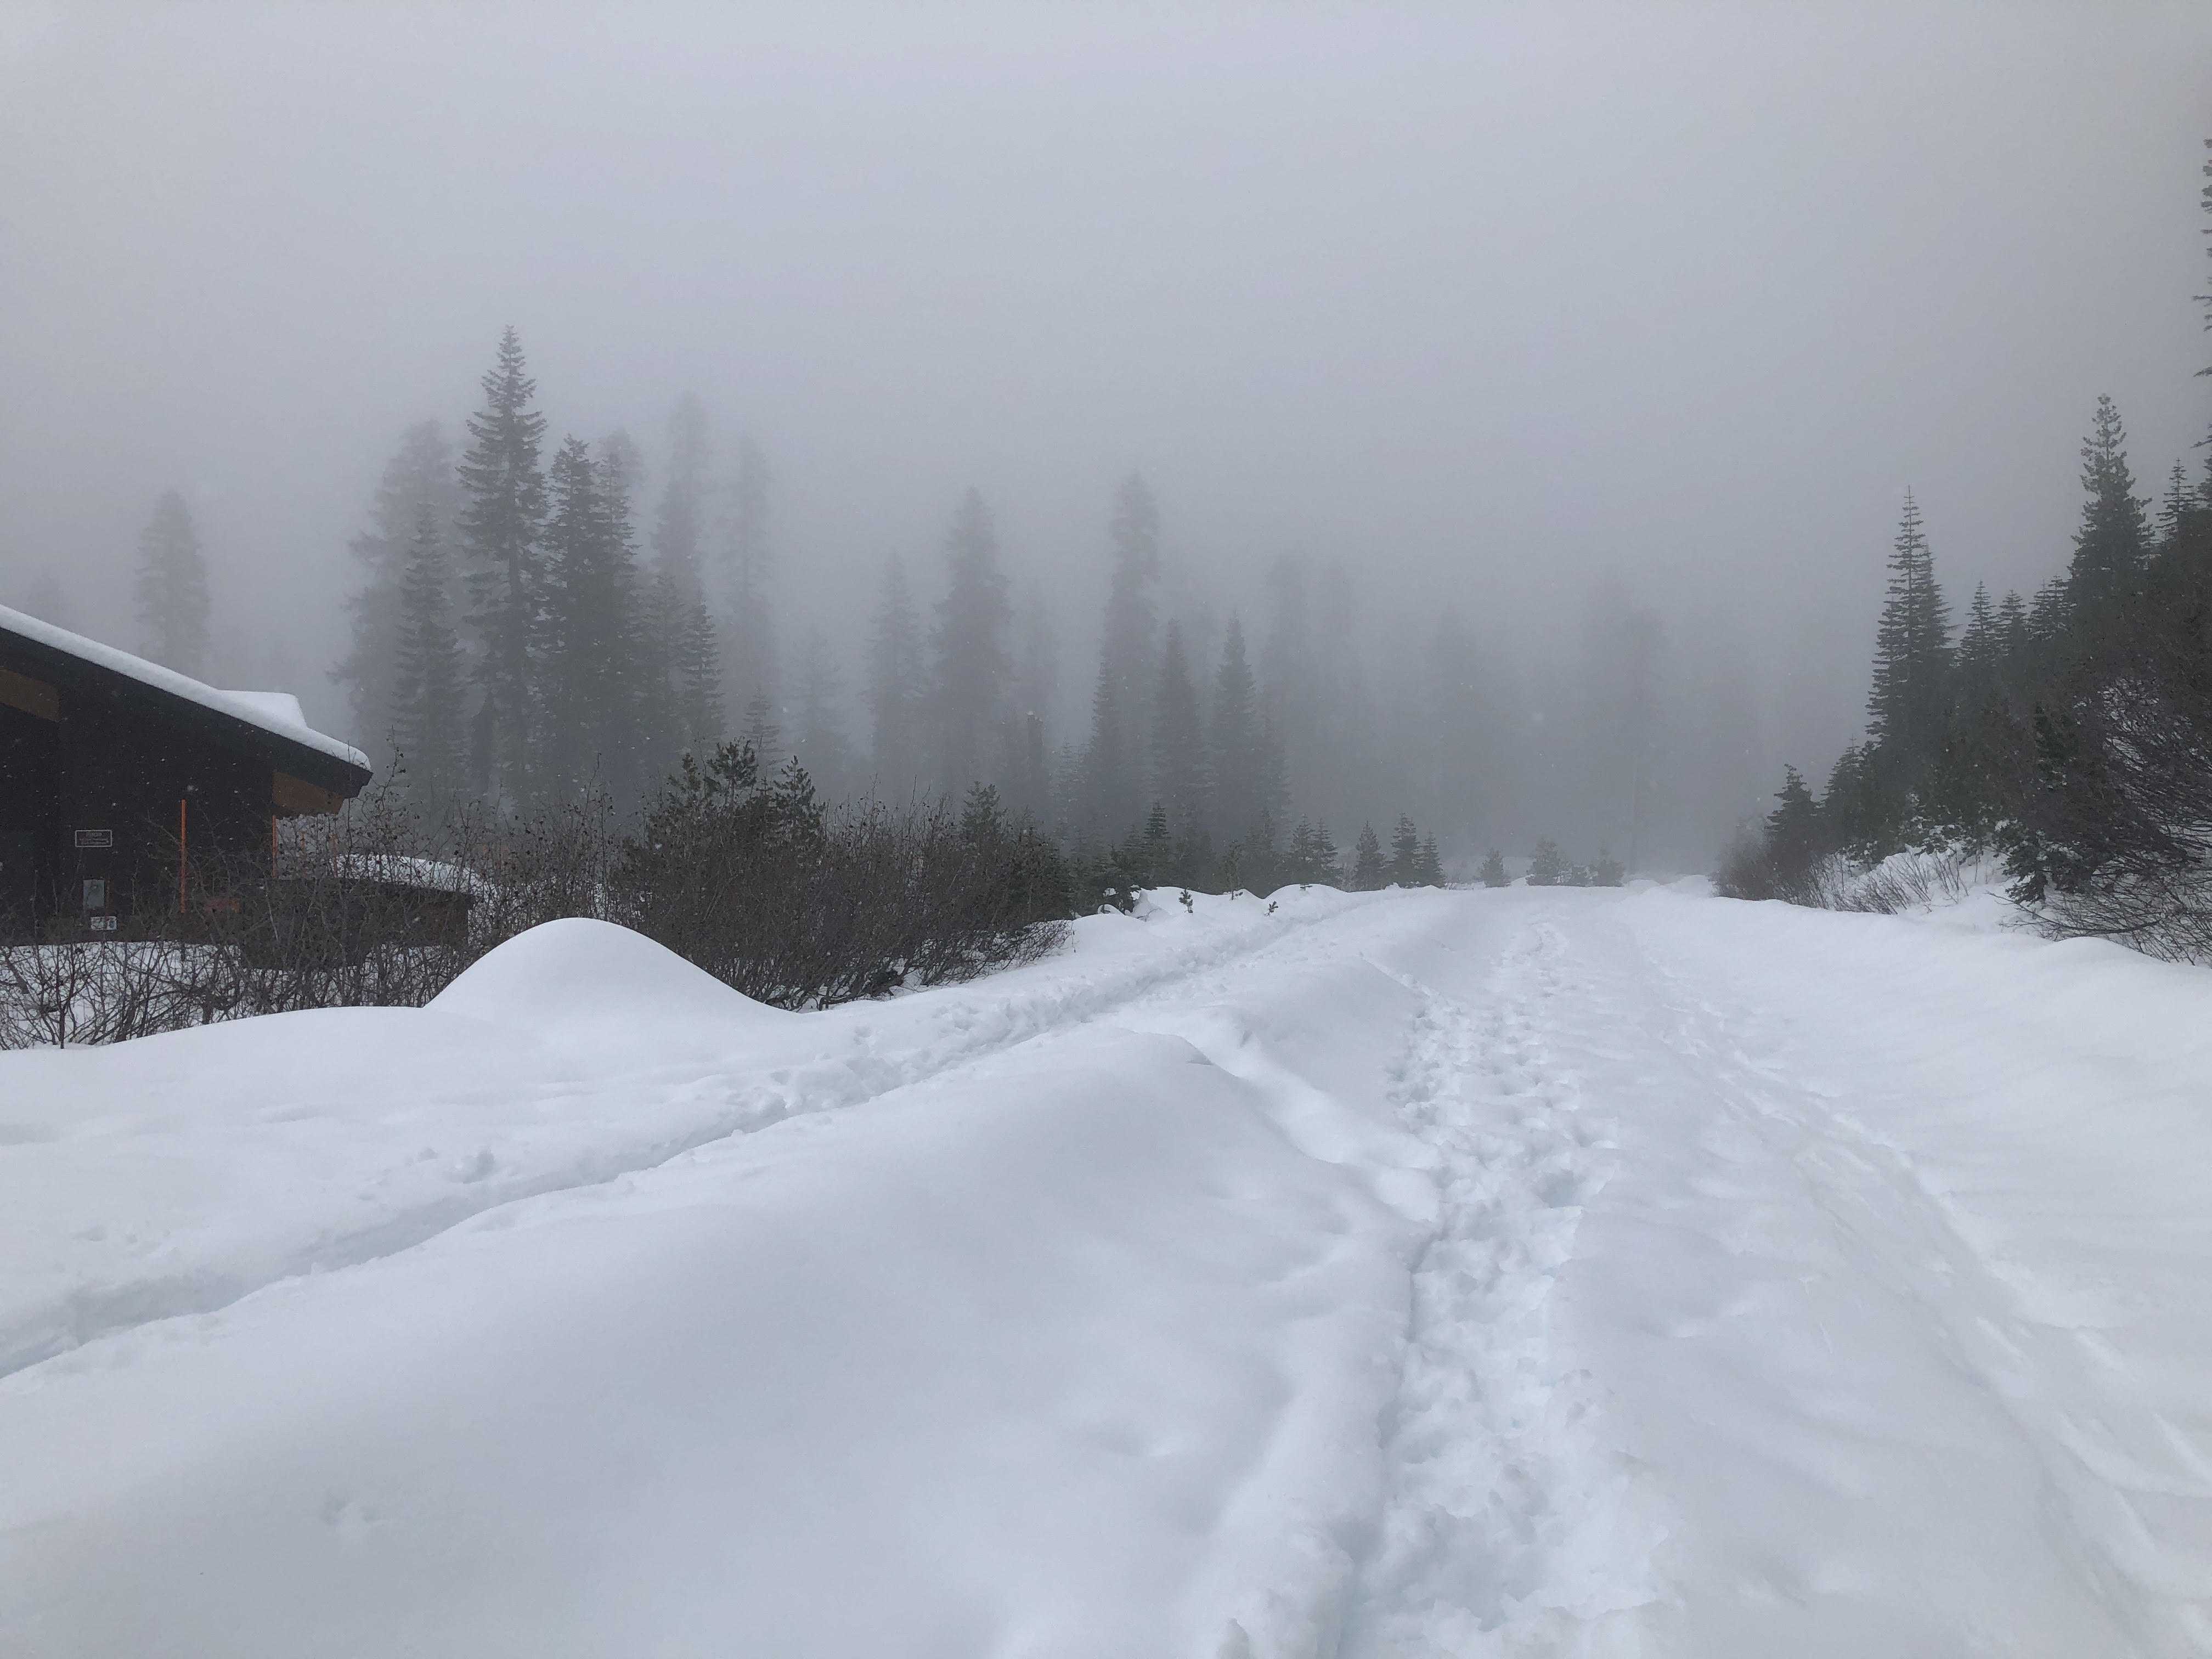 A snow-covered road seen from Kohm Yah-mah-nee Visitor Center